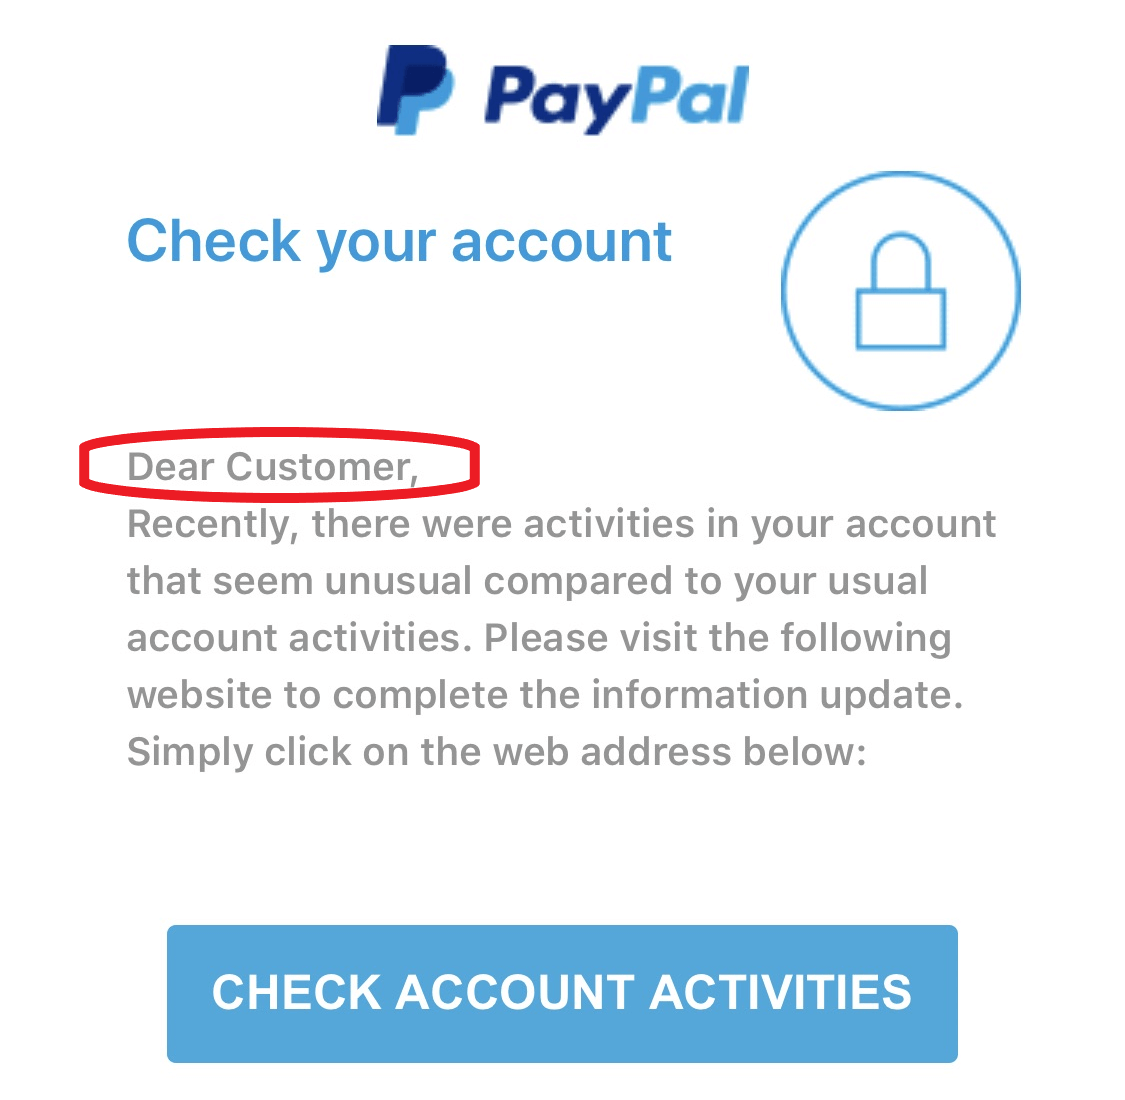 PayPal Email with Generic Greeting